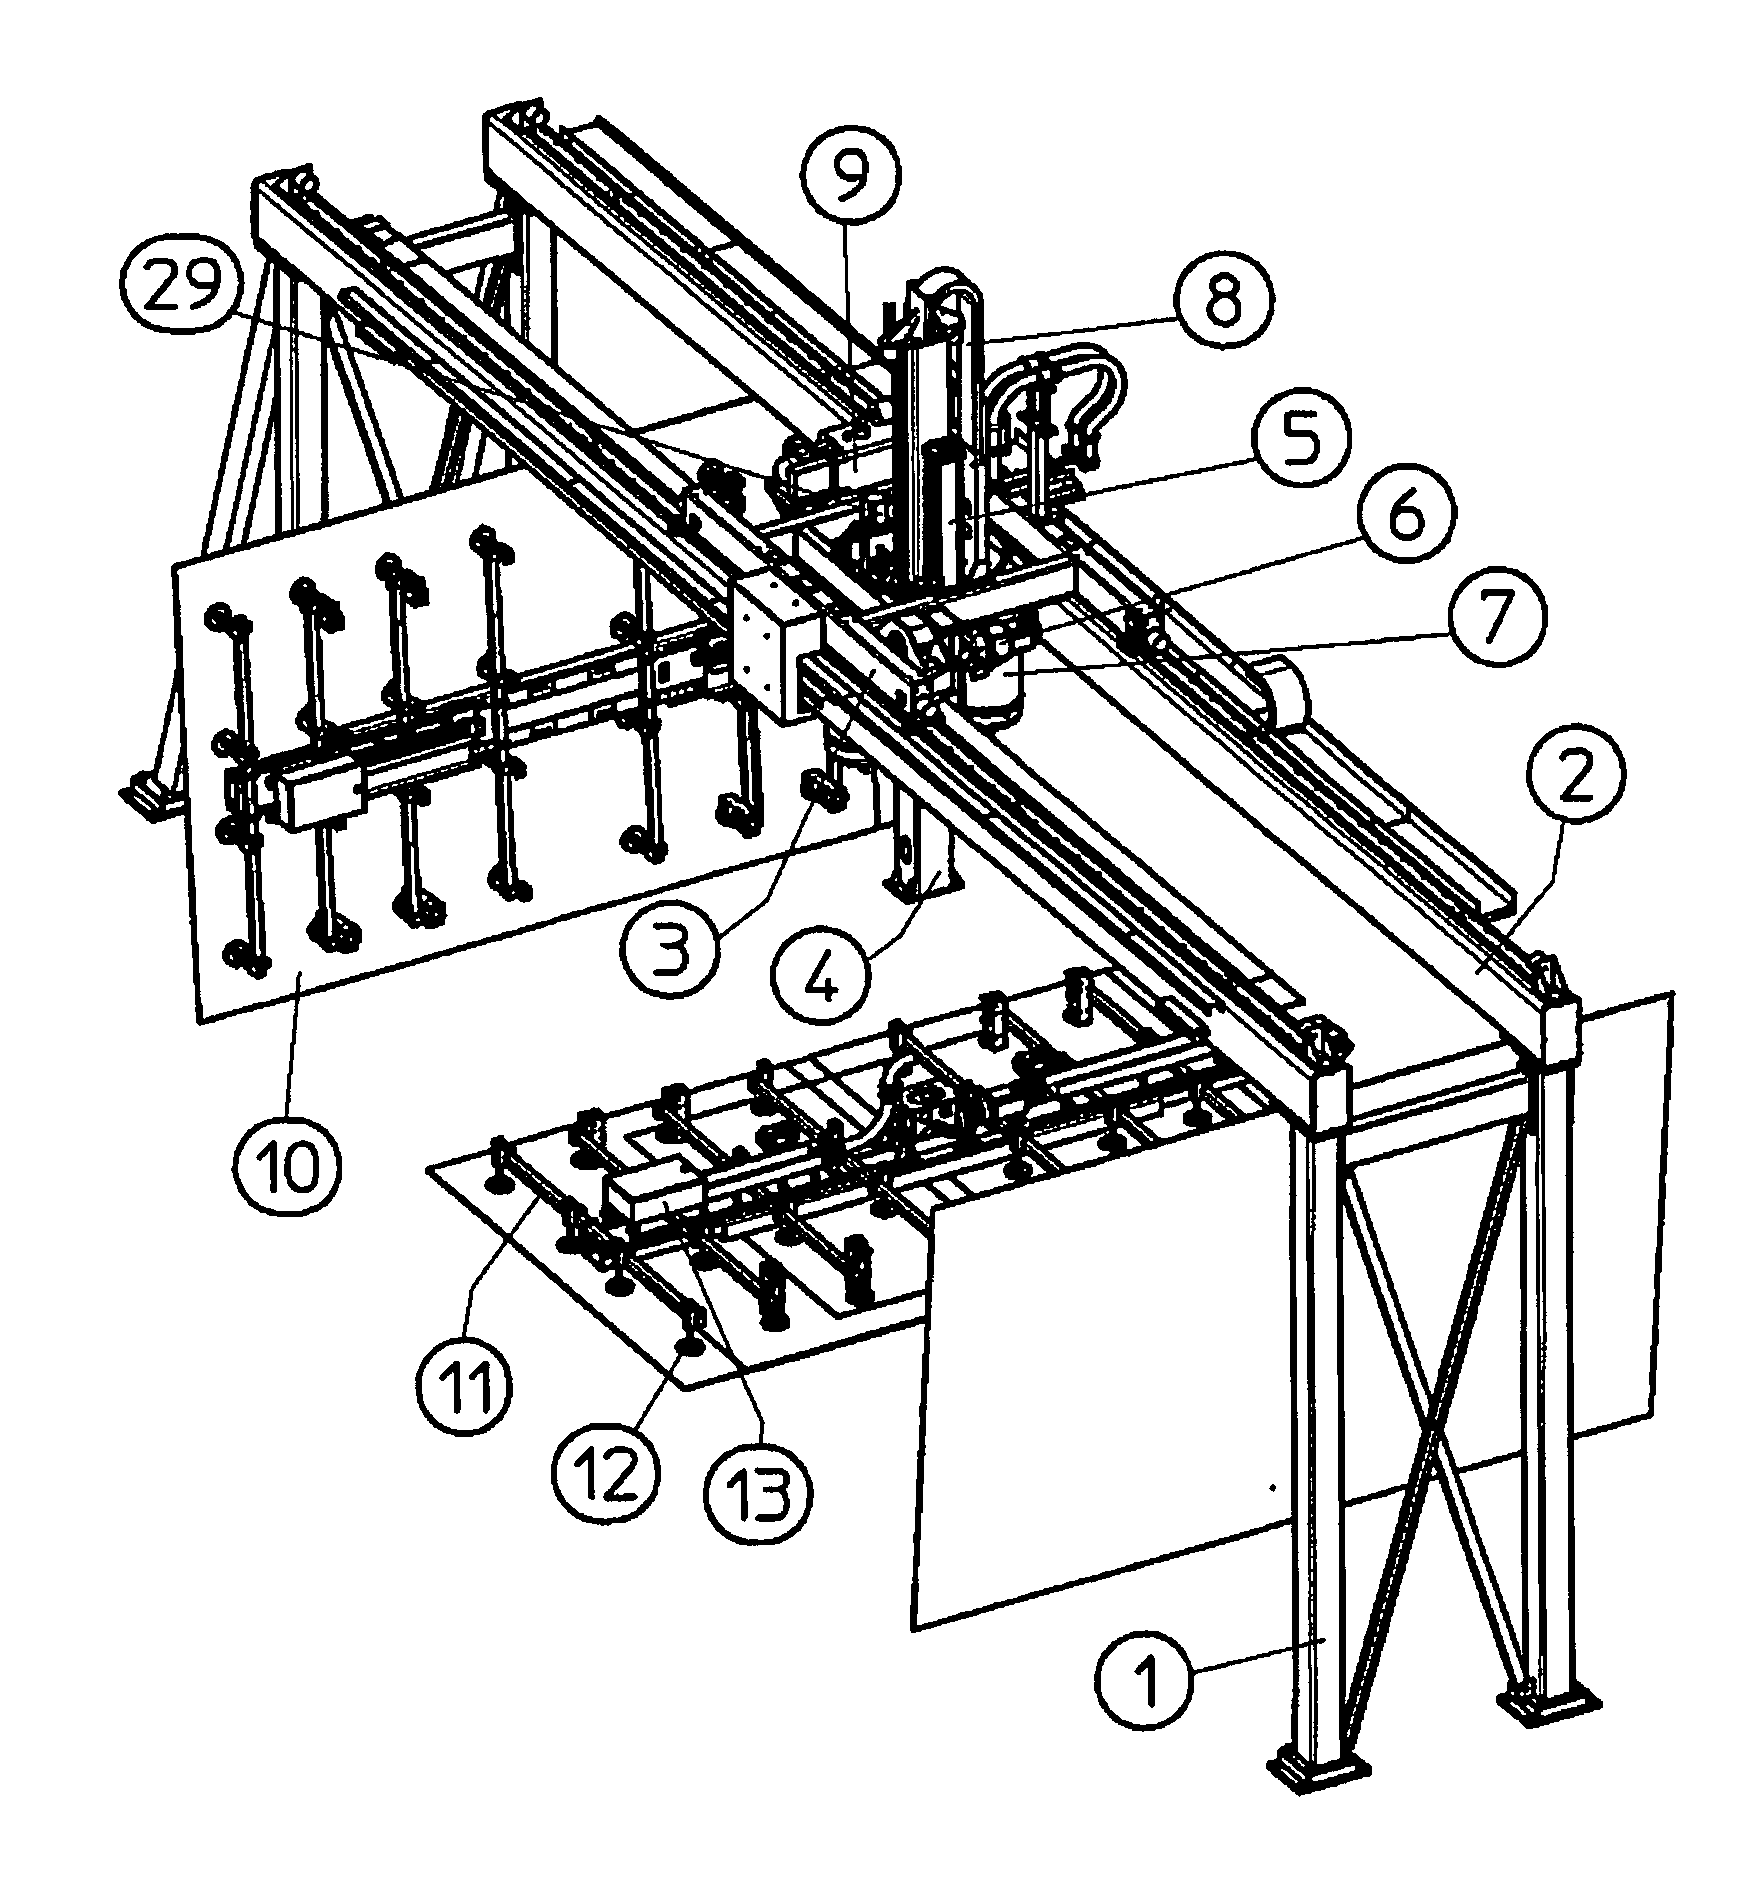 Portal re-positioning device for large-area glass plates